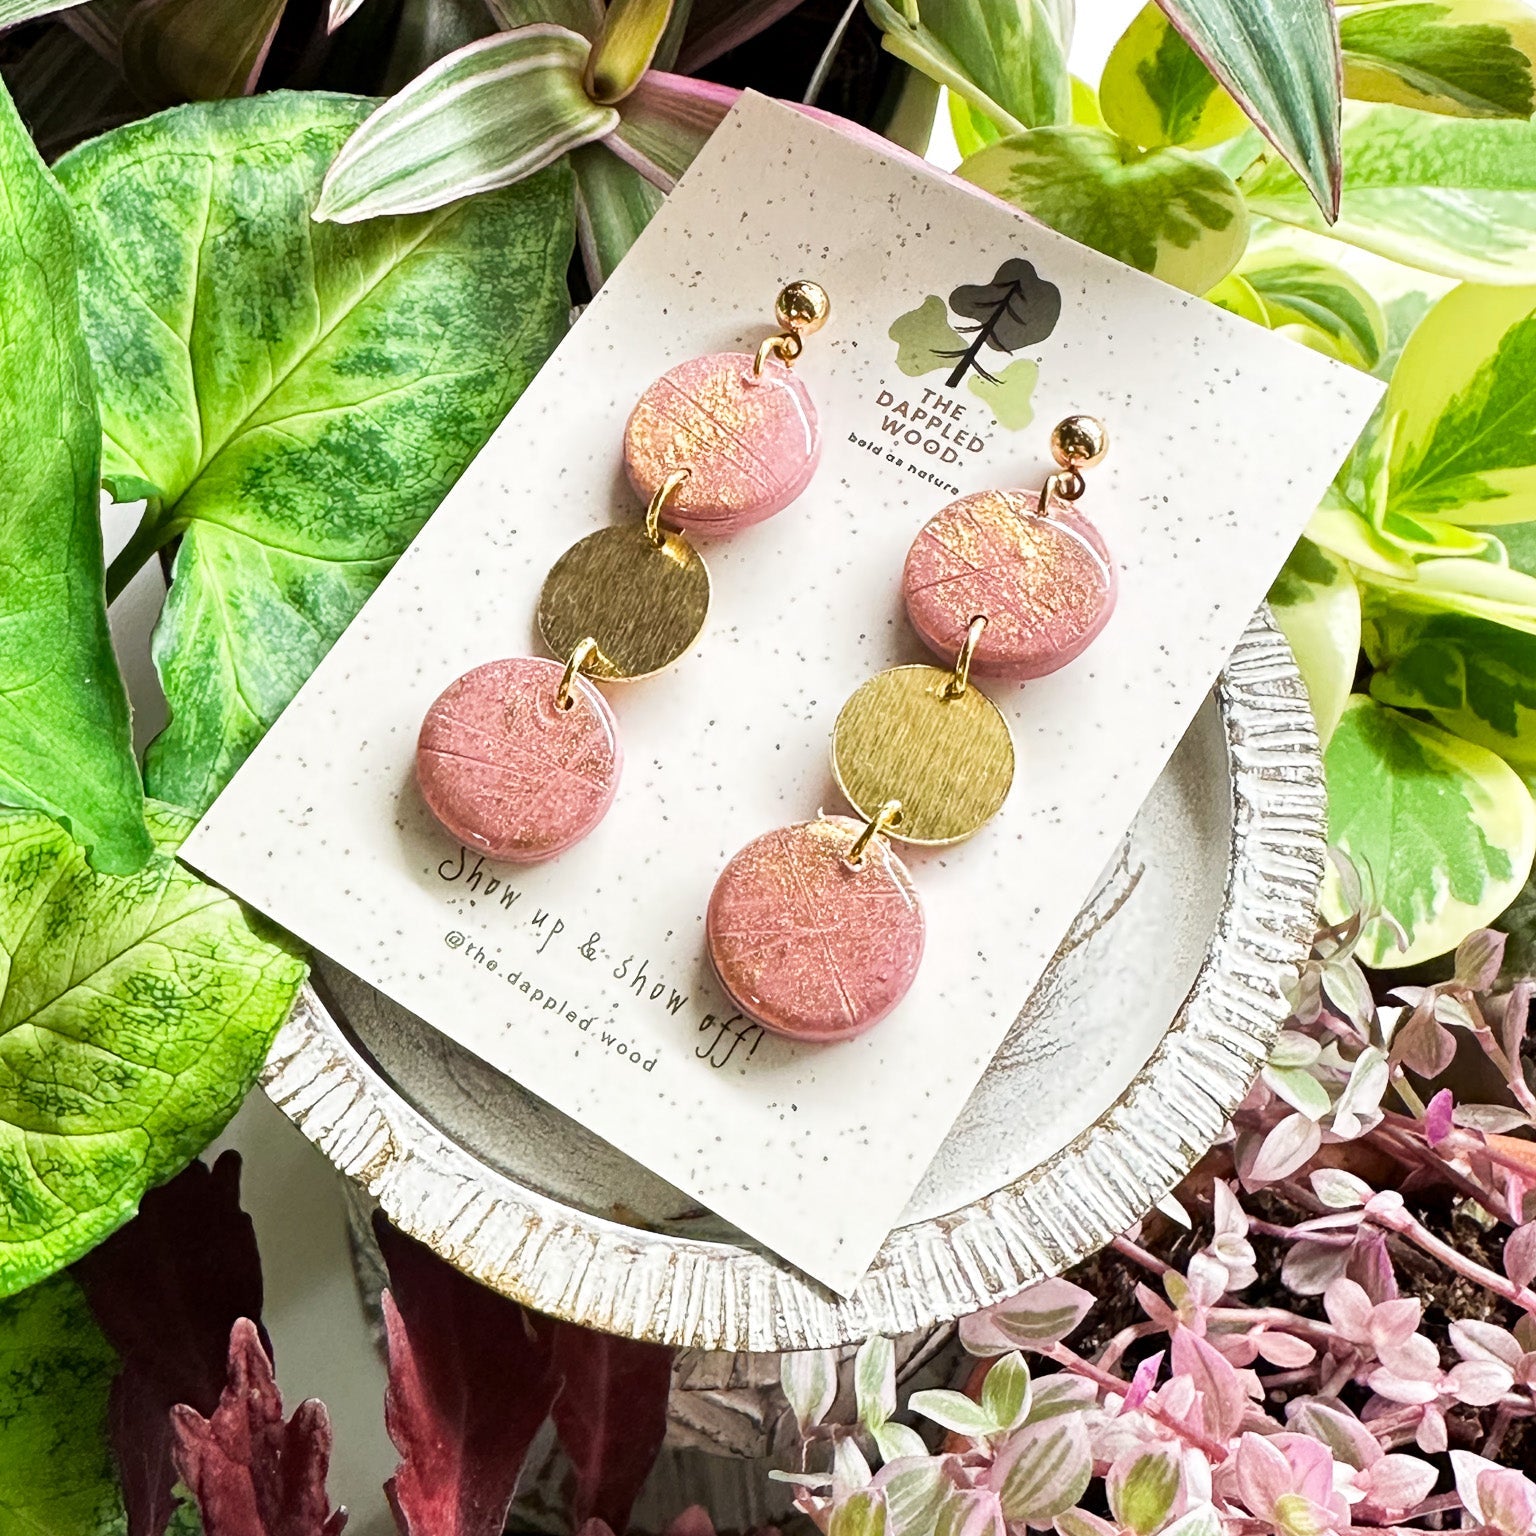 Handcrafted pink polymer clay disk earrings with gold shimmer and a textured brass connector charm, displayed on a speckled card with The Dappled Wood logo against a lush backdrop of green plants.